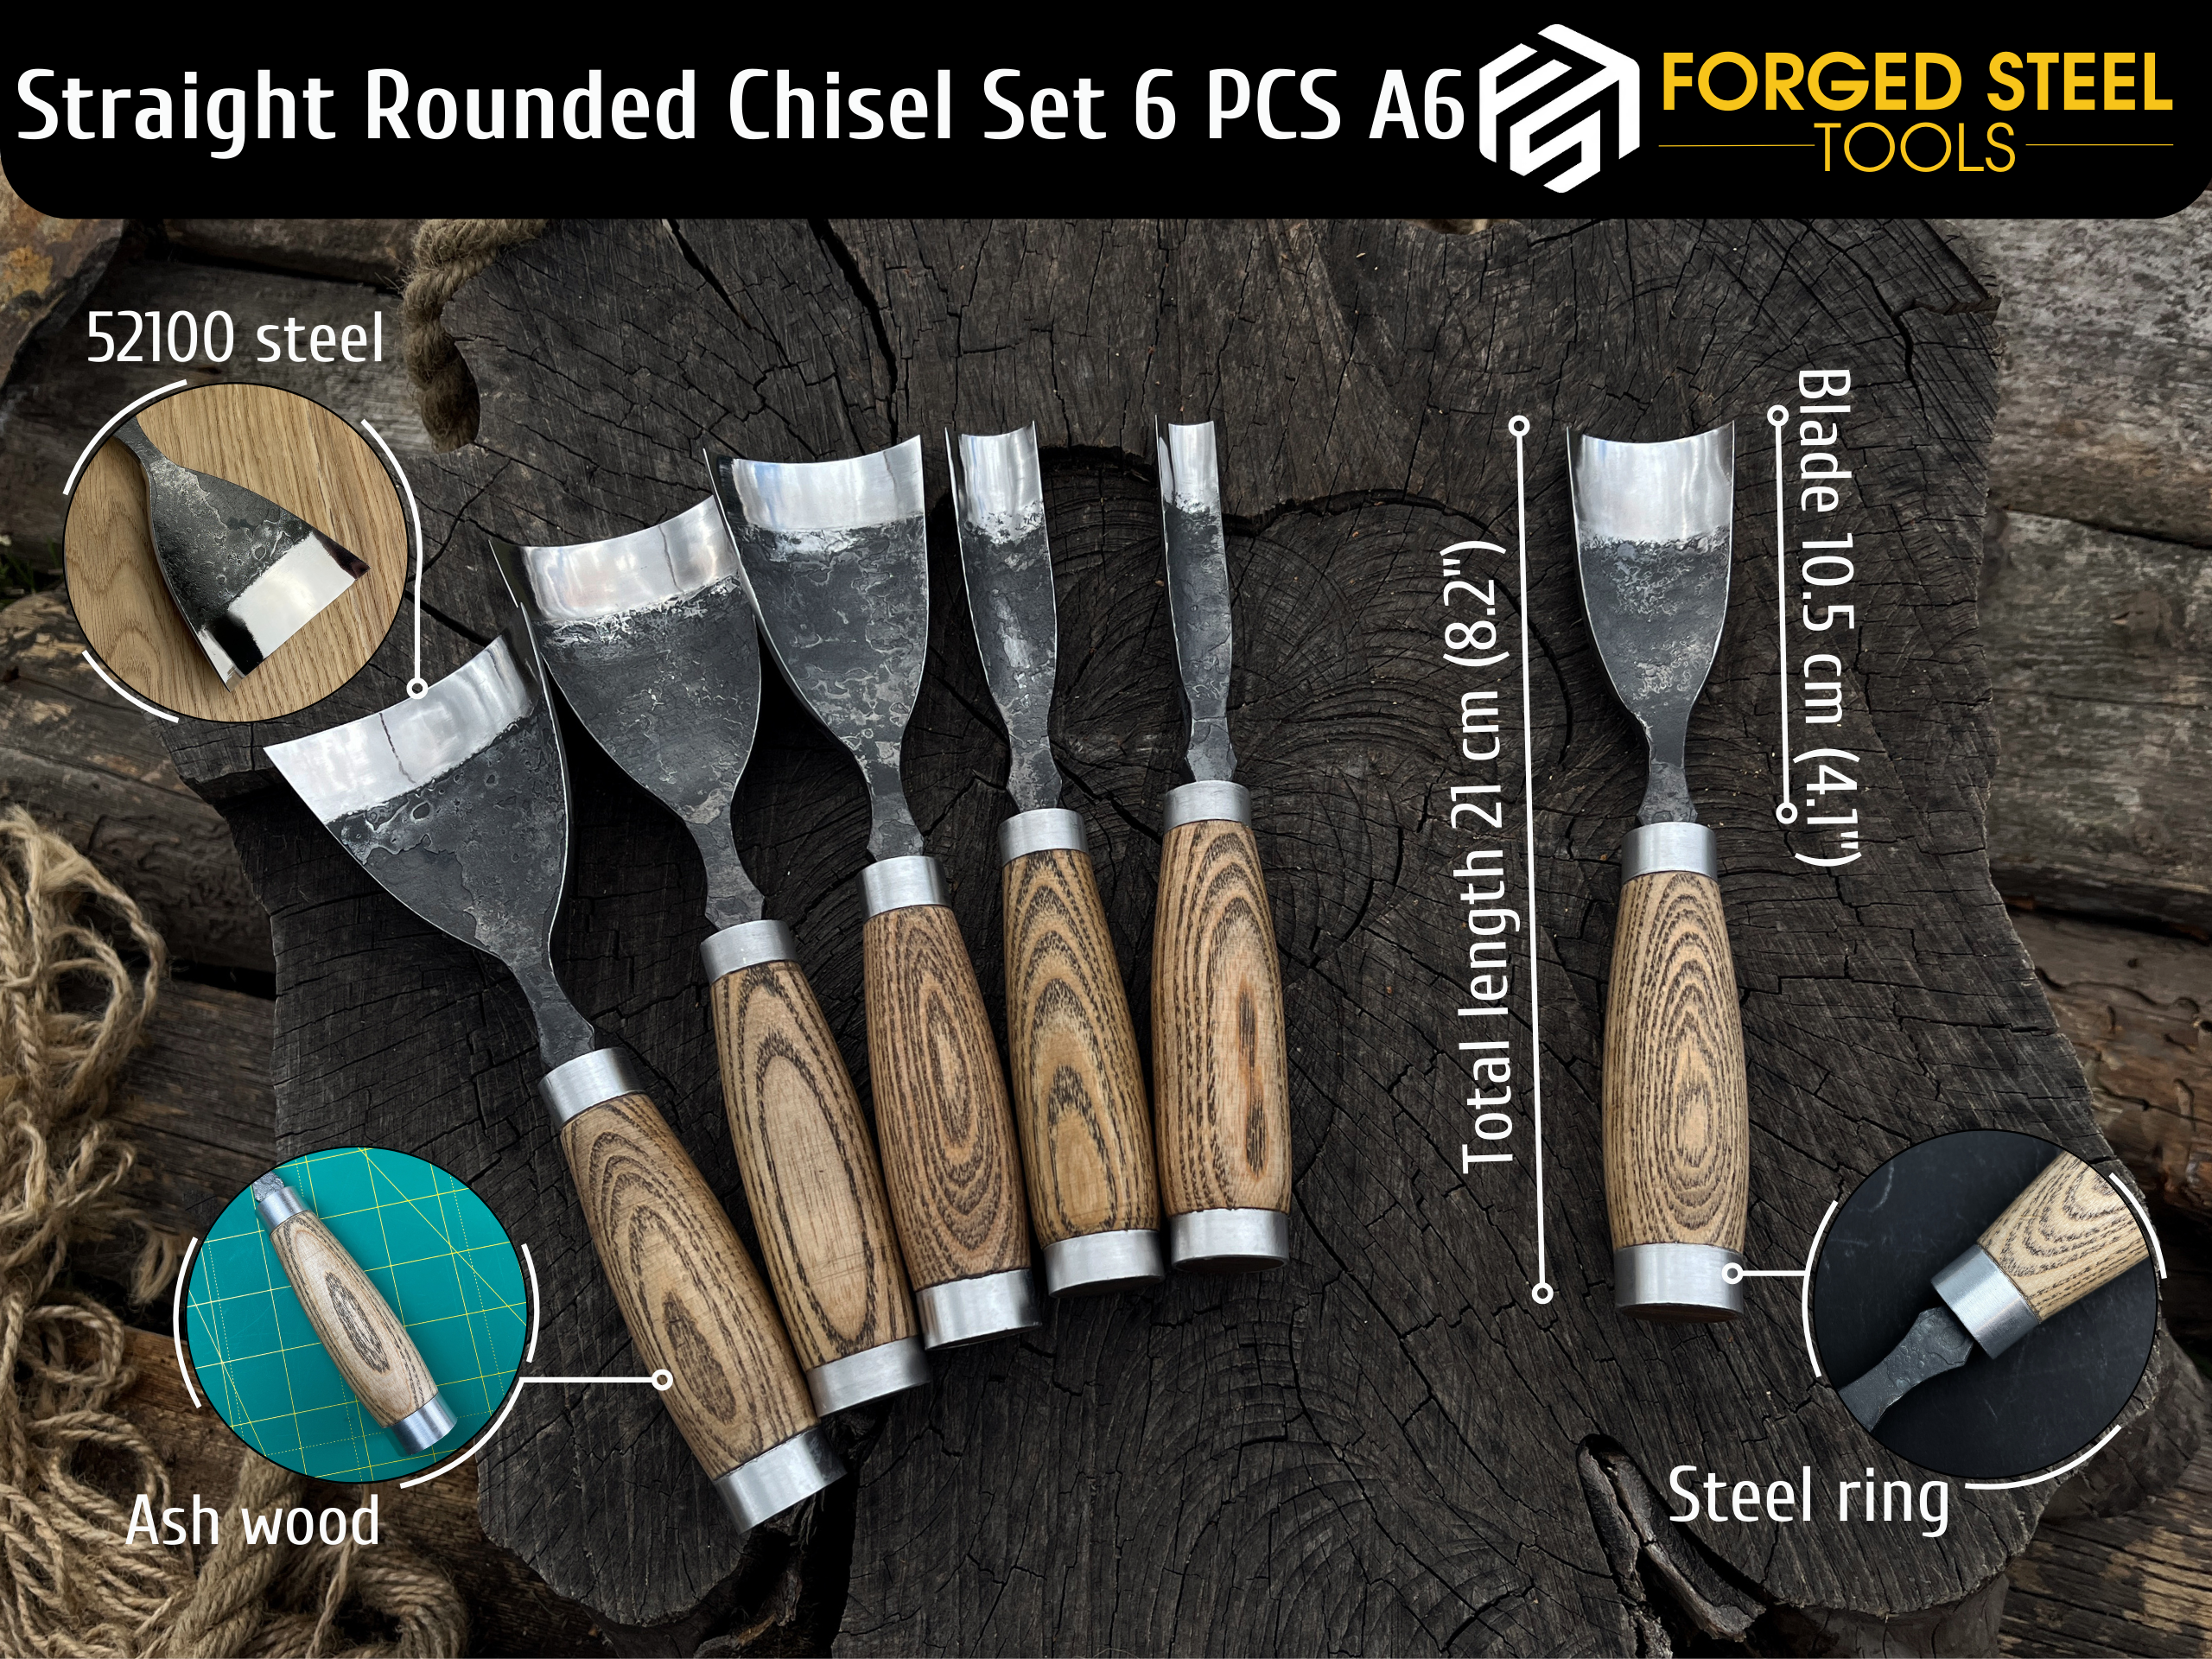 6-Piece Hand-Forged Straight Rounded Chisel